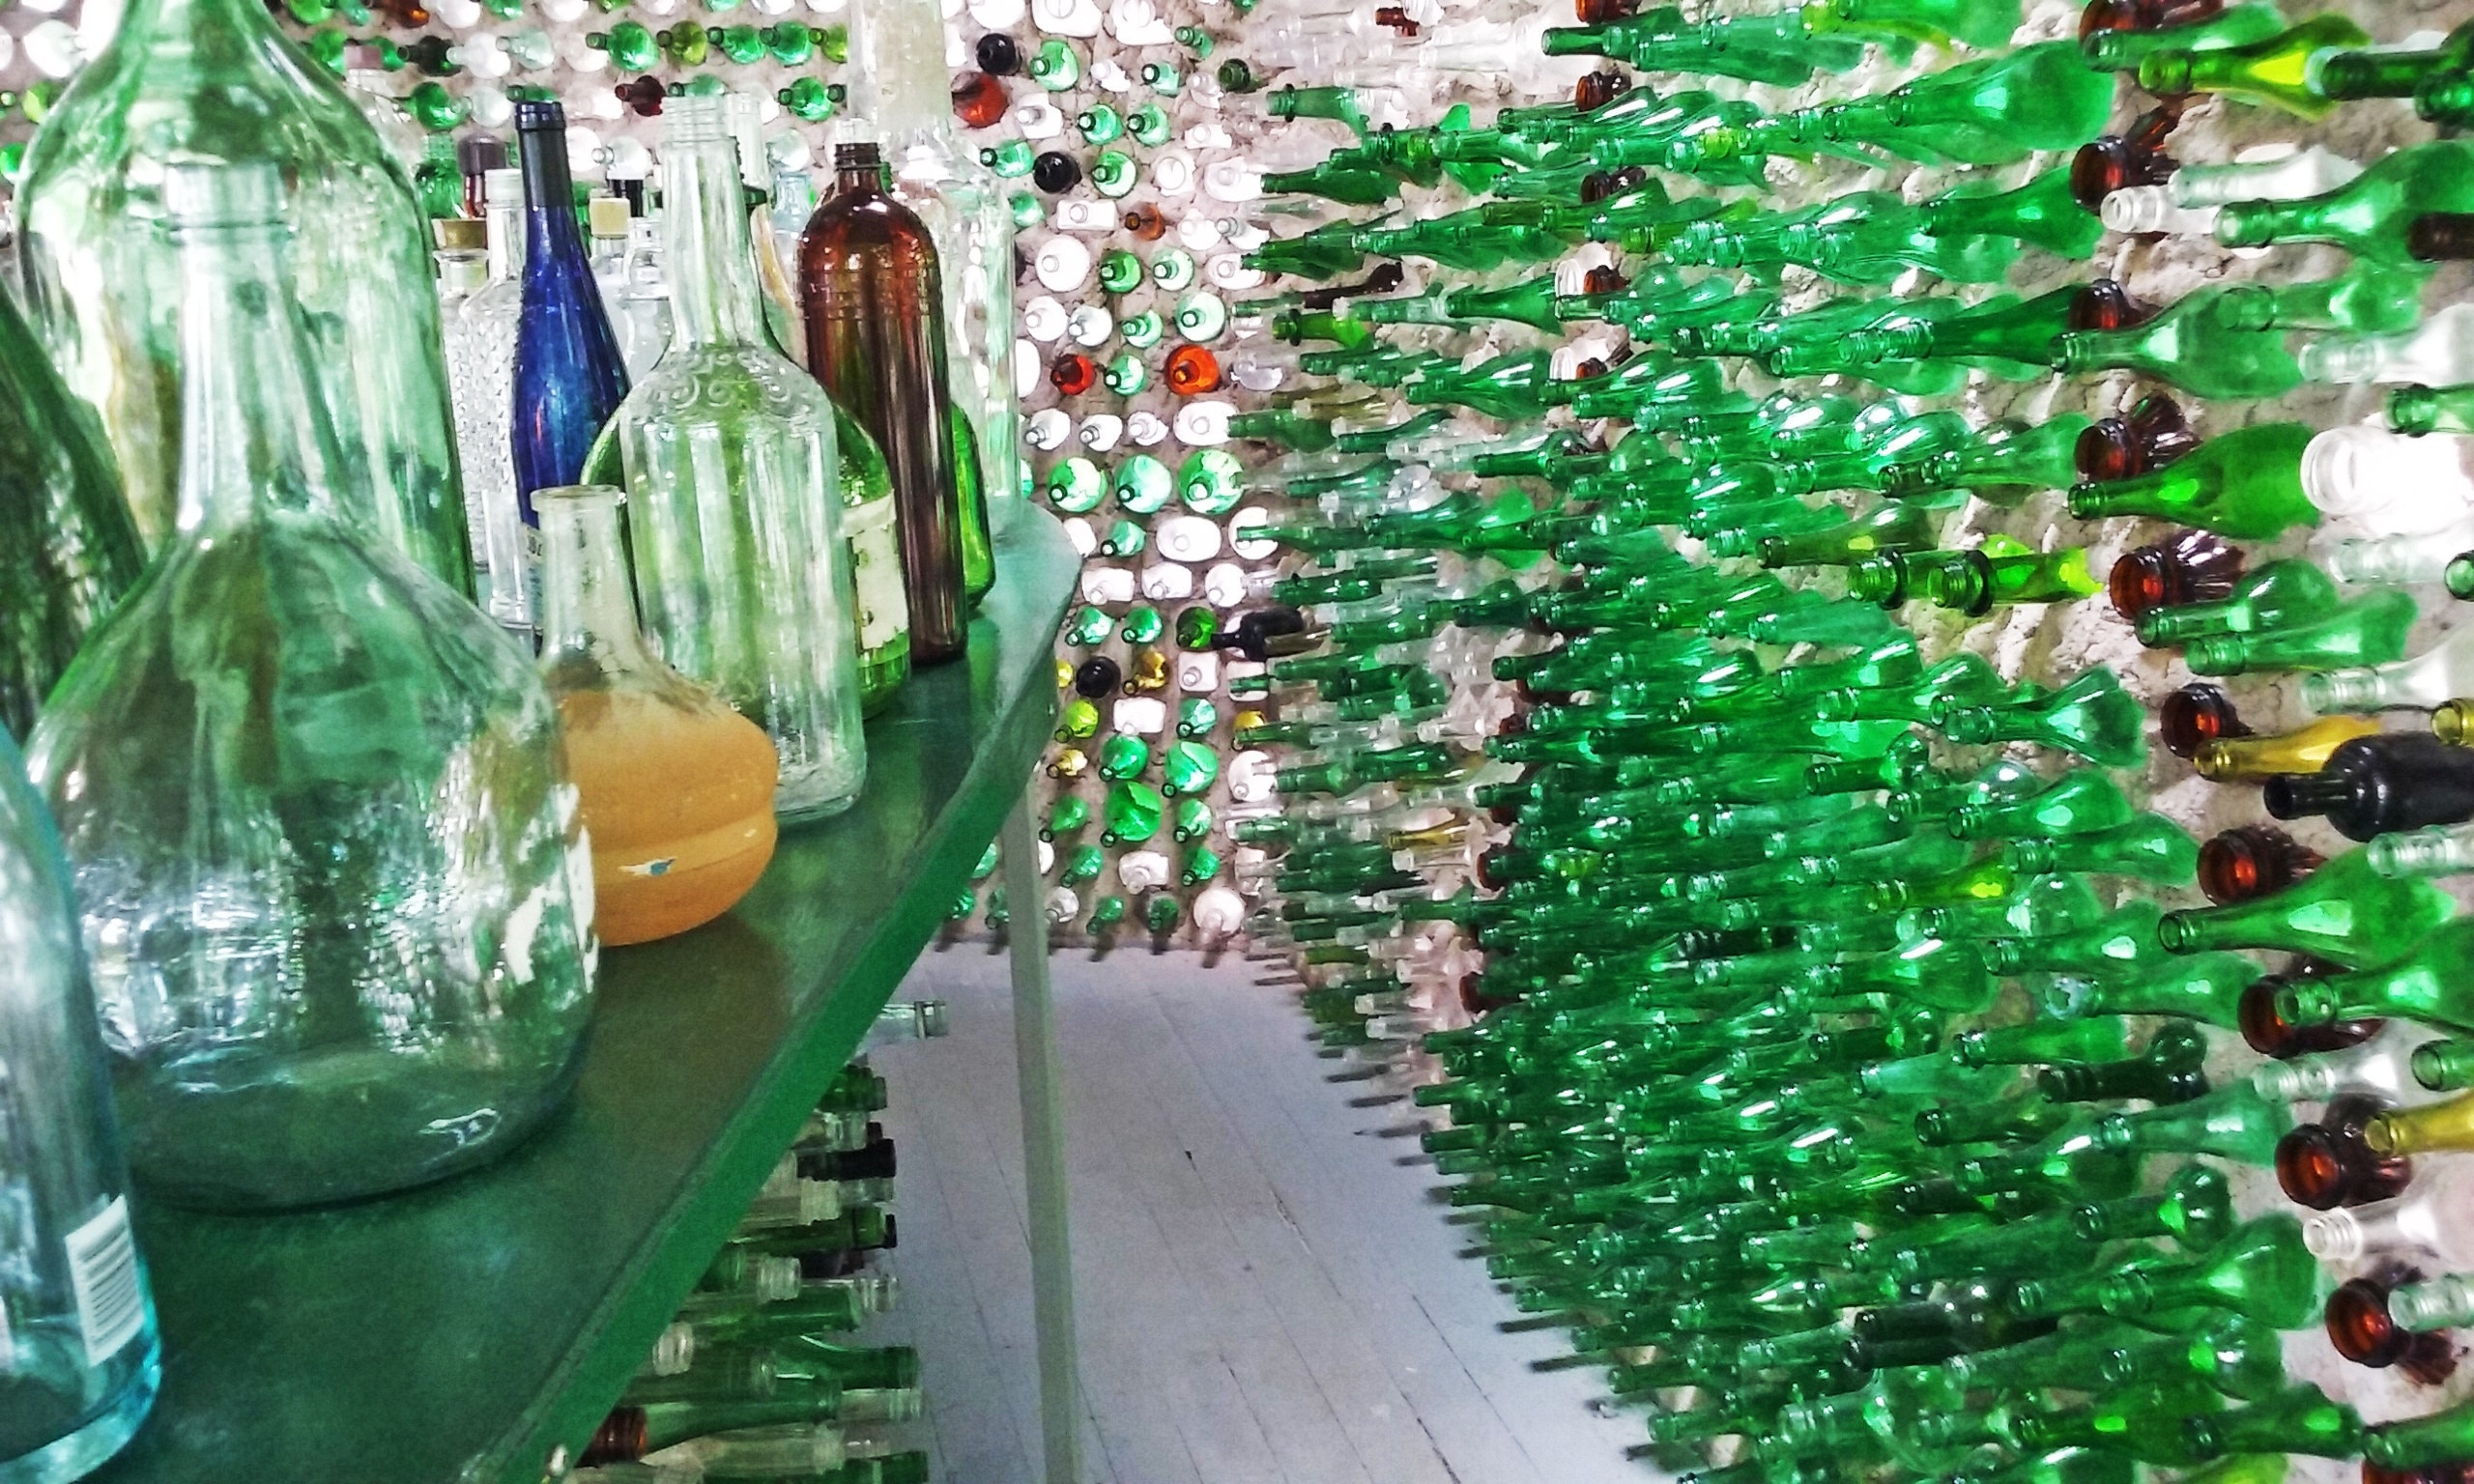 The Bottle Houses at Cape Egmont are a fun local site.